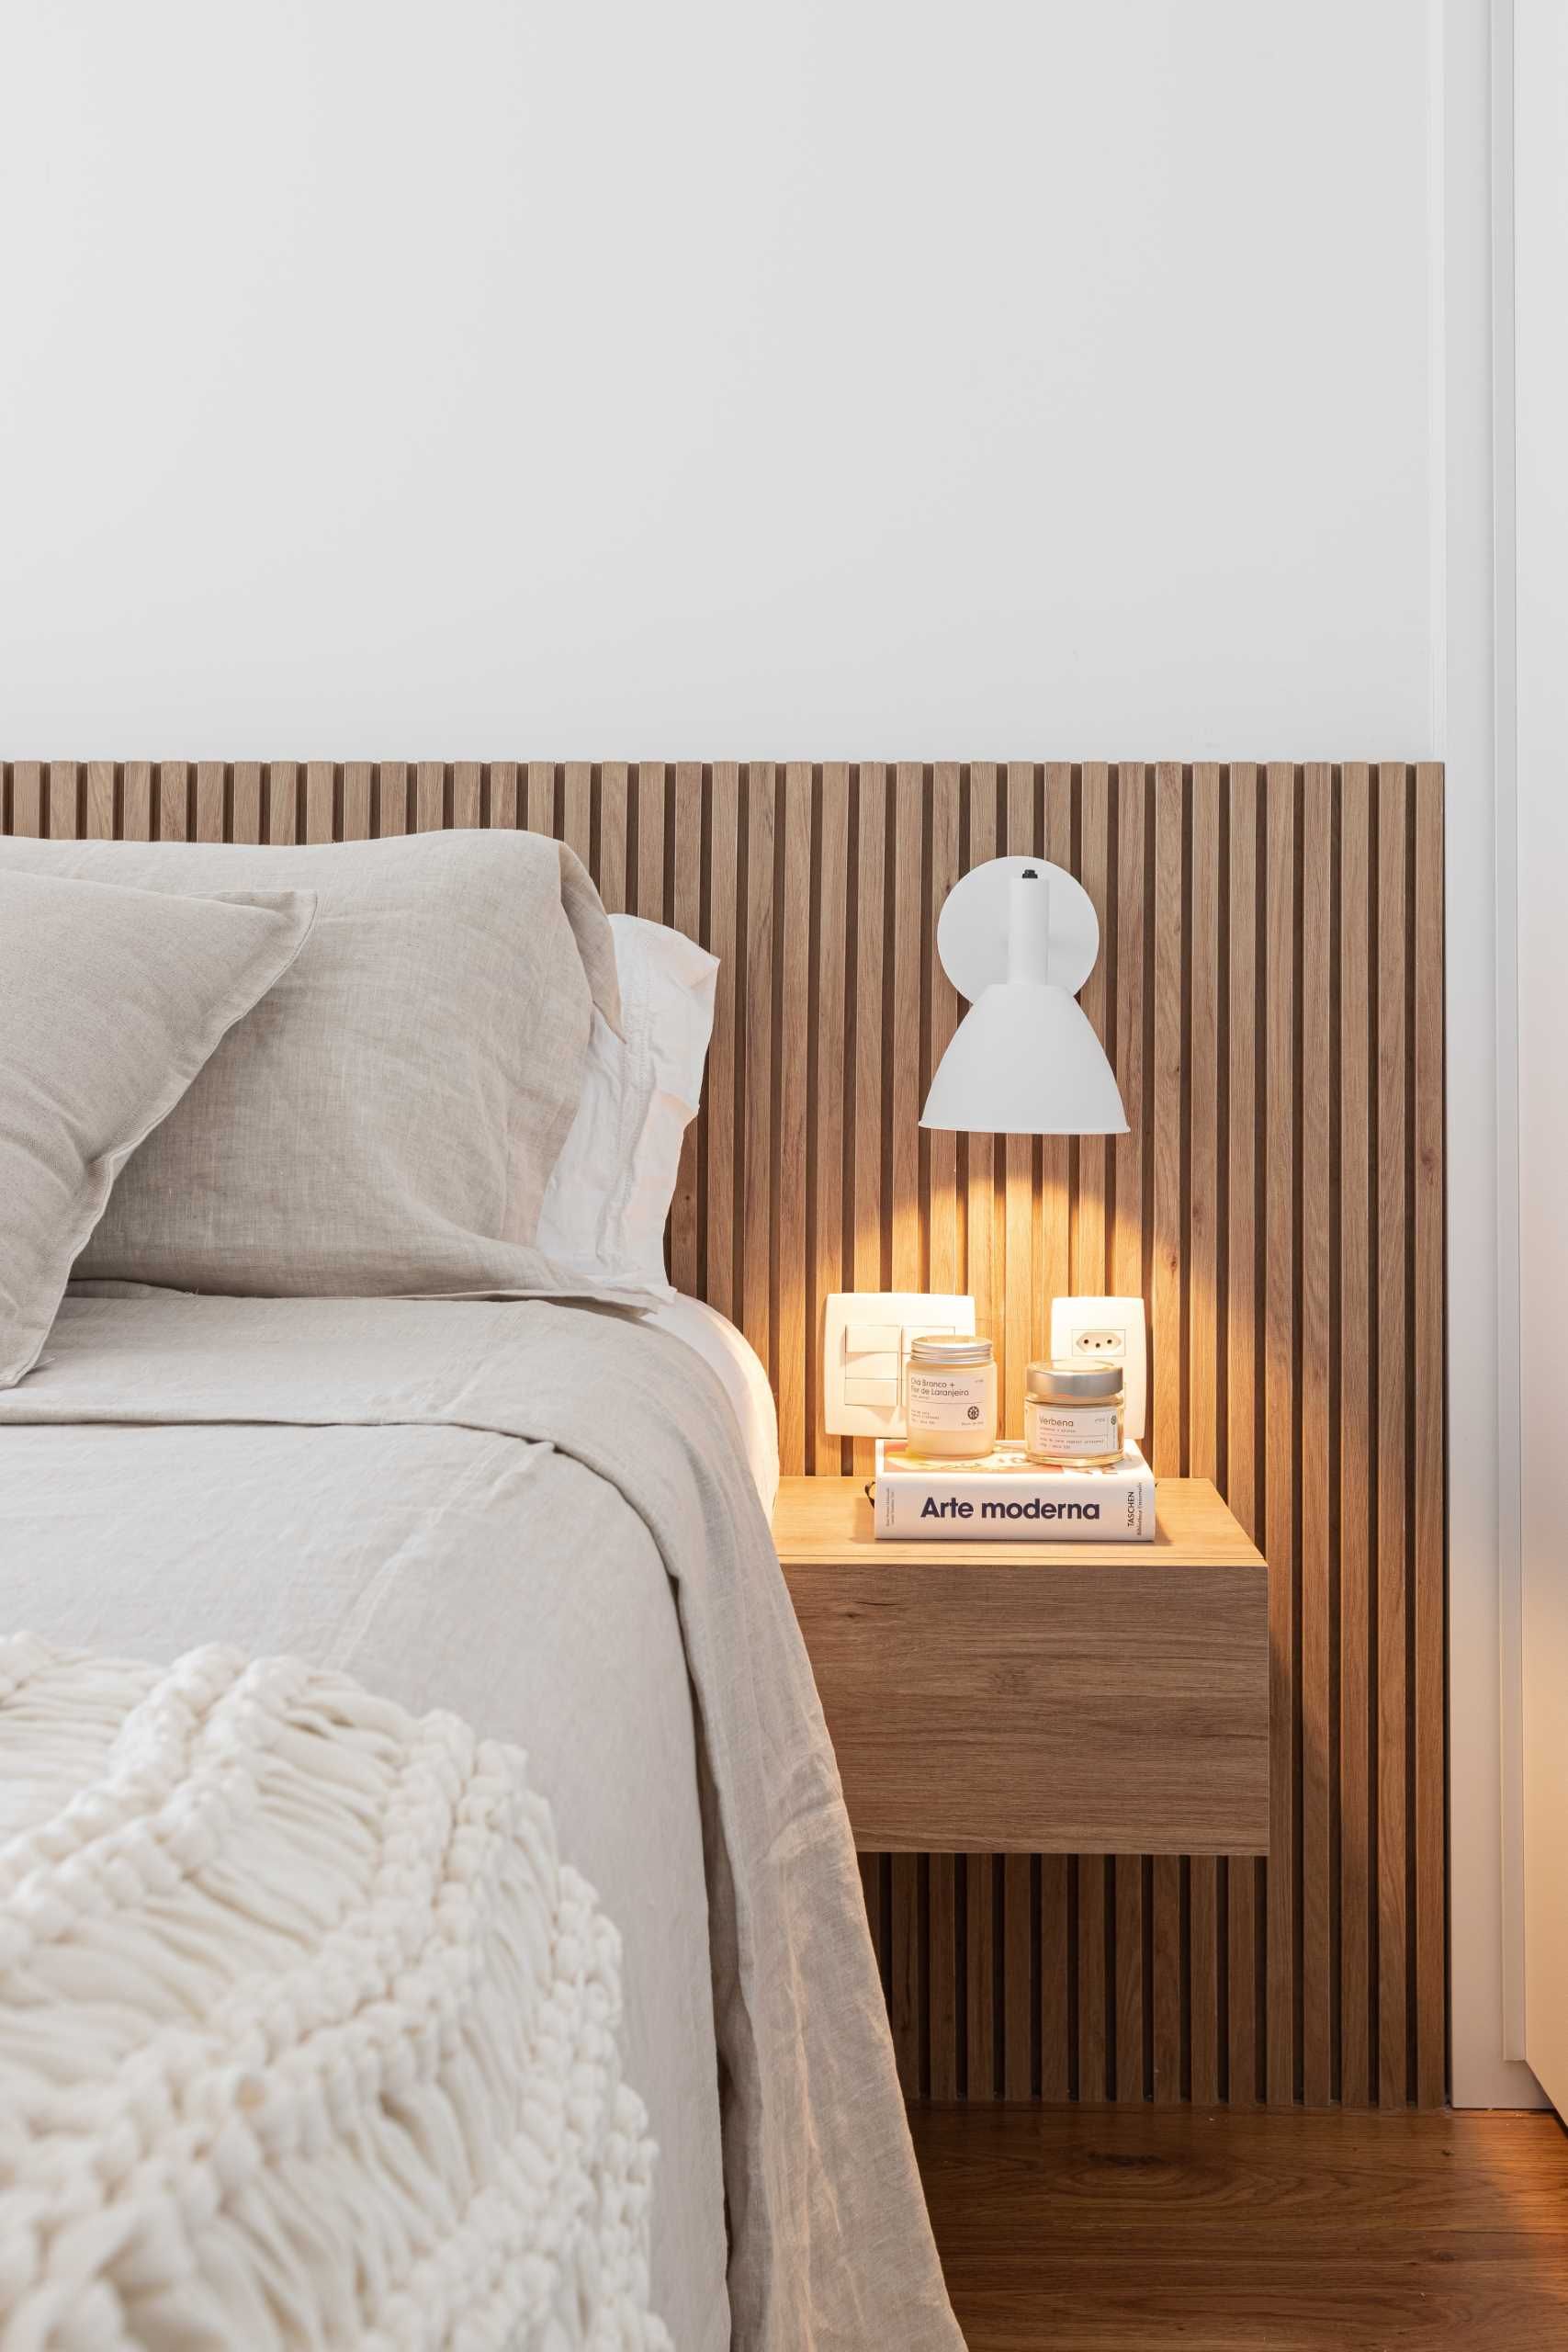 Wall Mounted Headboards - A Stylish and Space-Saving Solution